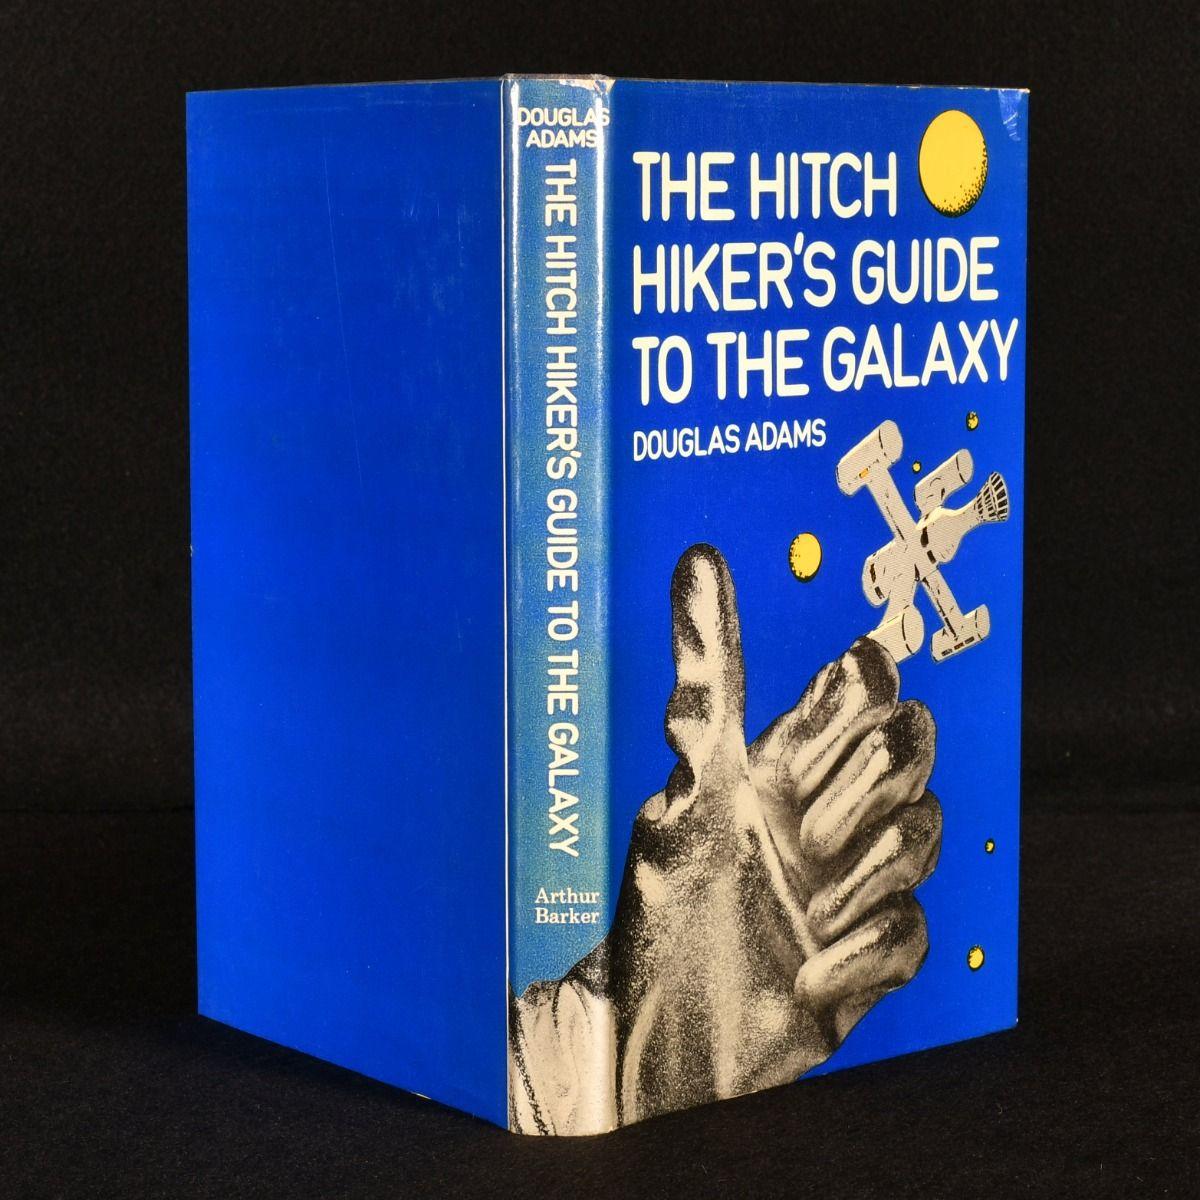 The first edition of this incredibly popular science fiction novel, a smart copy in the original second state dust wrapper.

The first edition, first impression. Uncommon to see the first U.K. edition. 

In the original unclipped second state dust